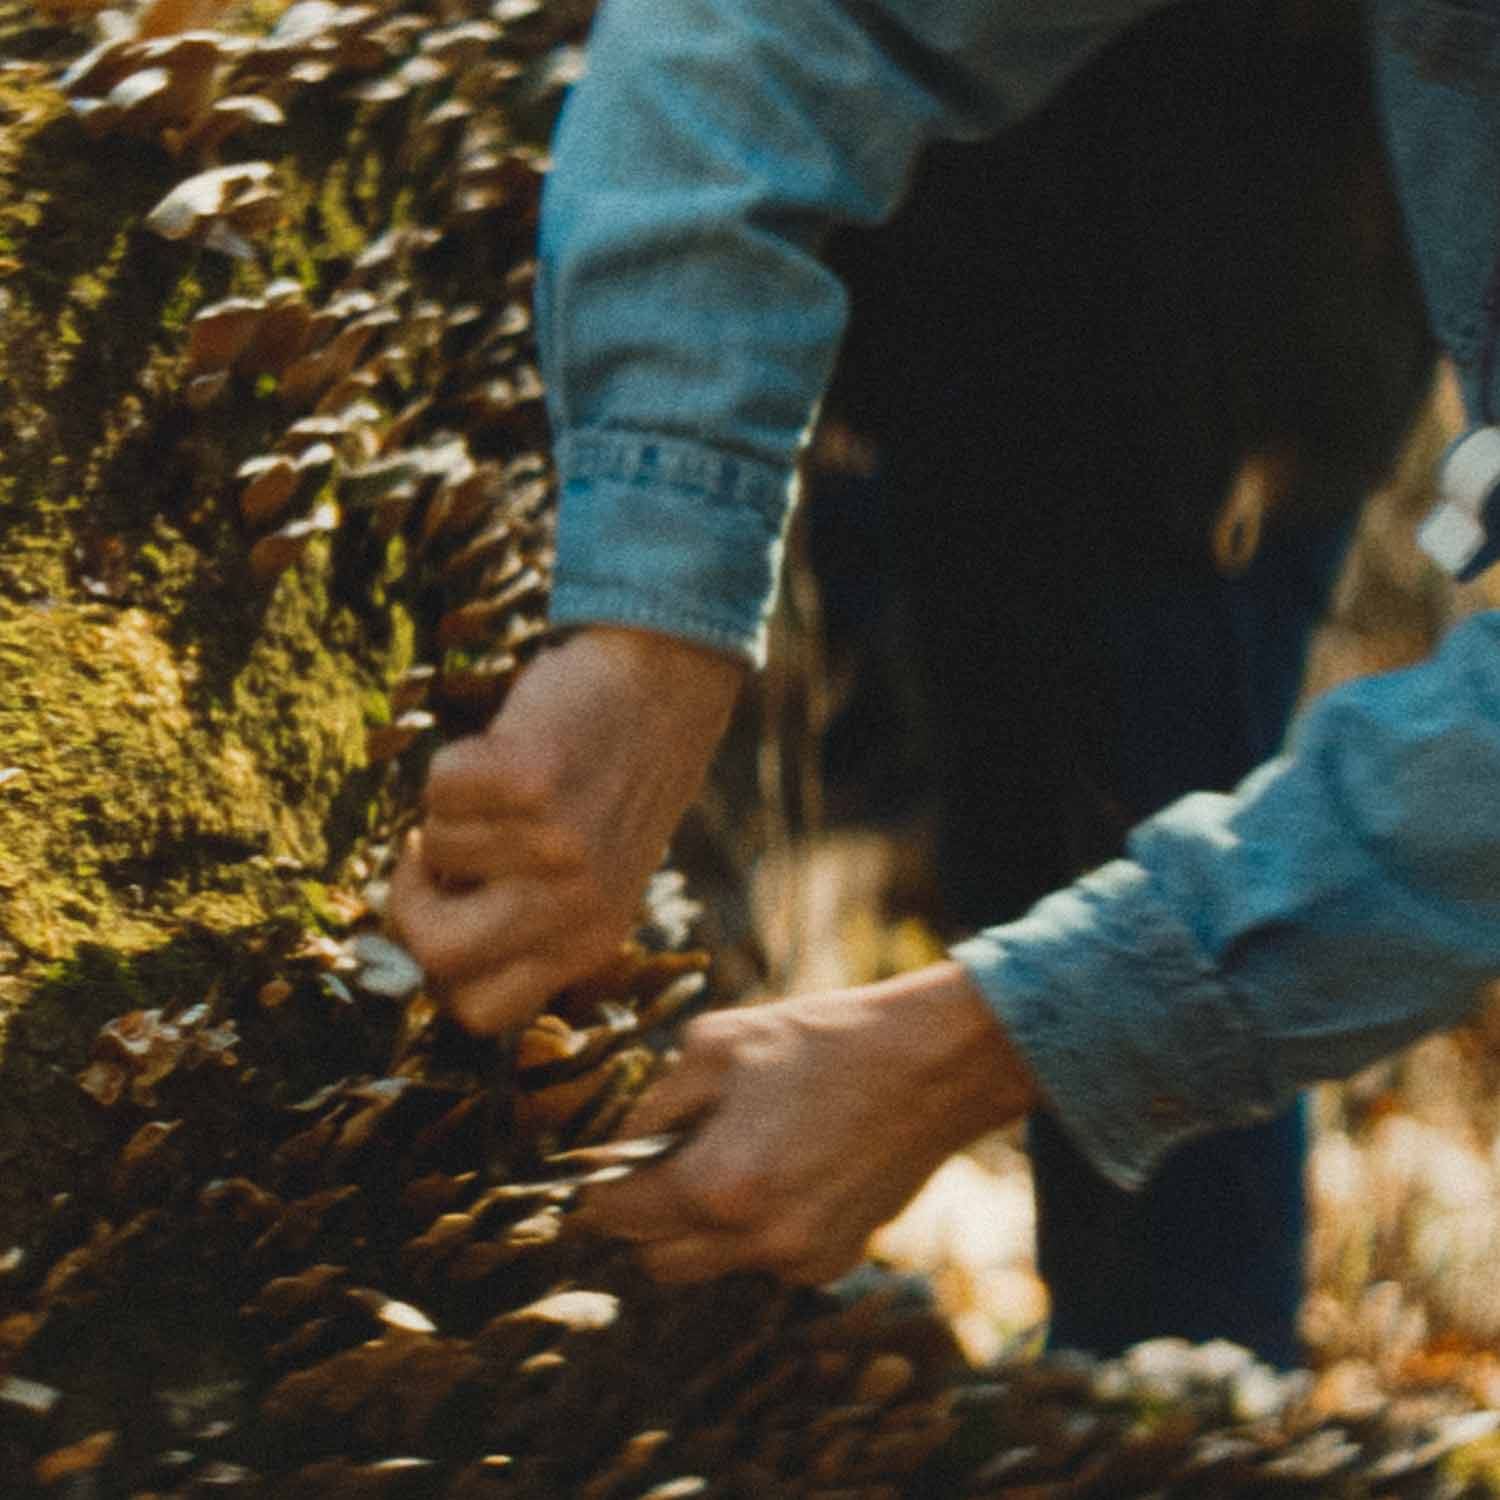 A man harvesting mushrooms from the forest floor